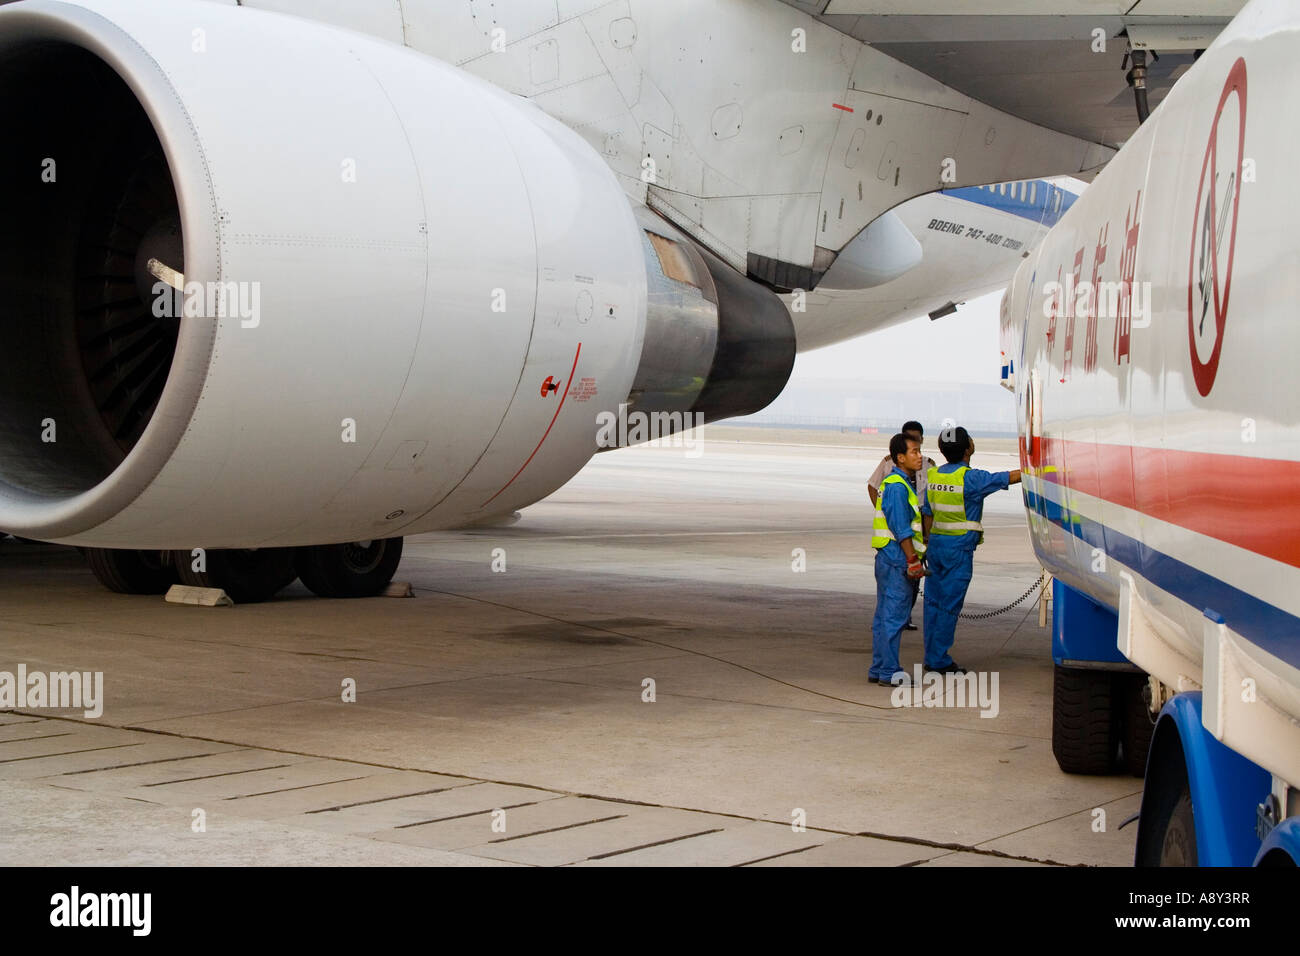 Ground Crew Refueling a China Air Airplane from a Fuel Truck Capital China International Airport Beijing China PEK BJS Stock Photo